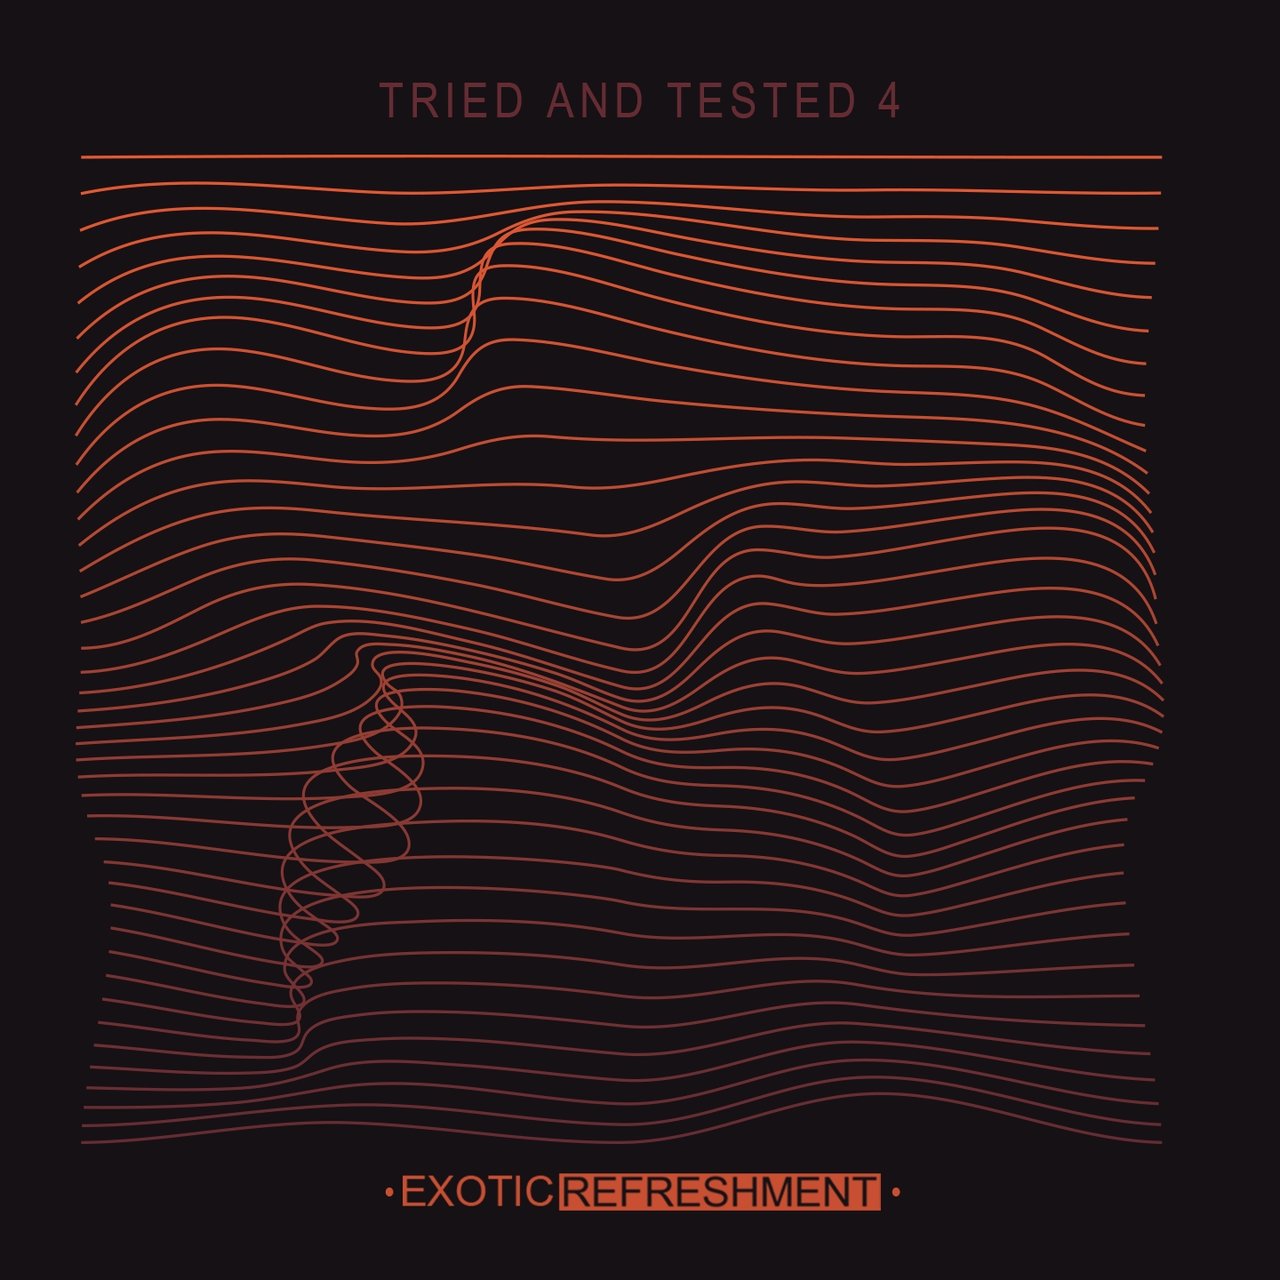 image cover: VA - Tried and Tested 4 / Exotic Refreshment